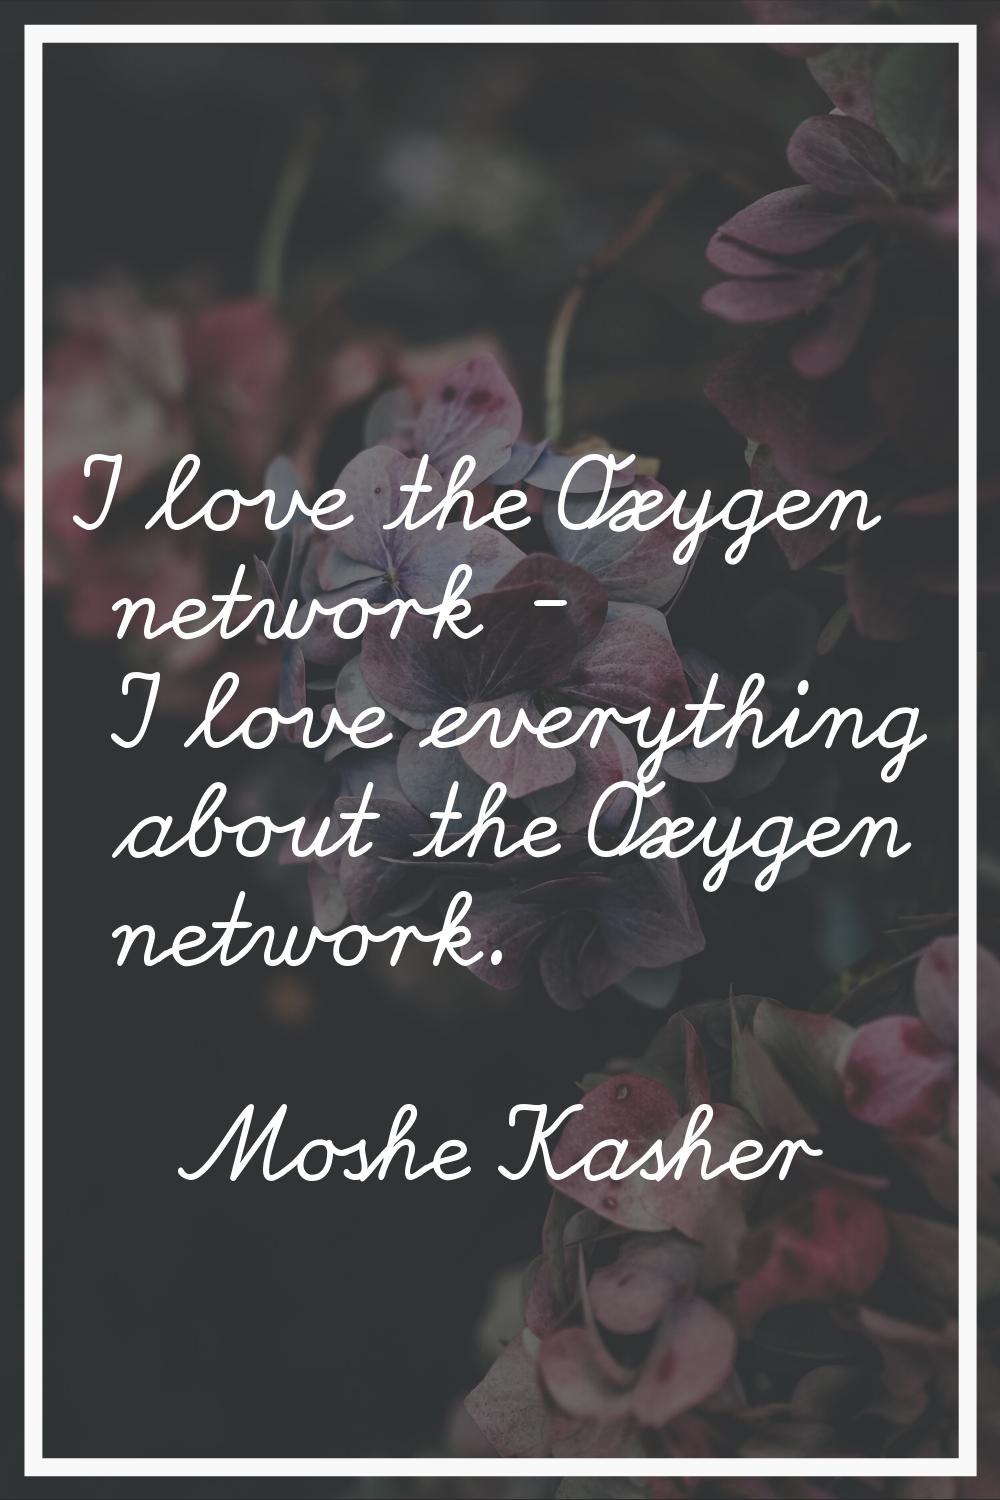 I love the Oxygen network - I love everything about the Oxygen network.